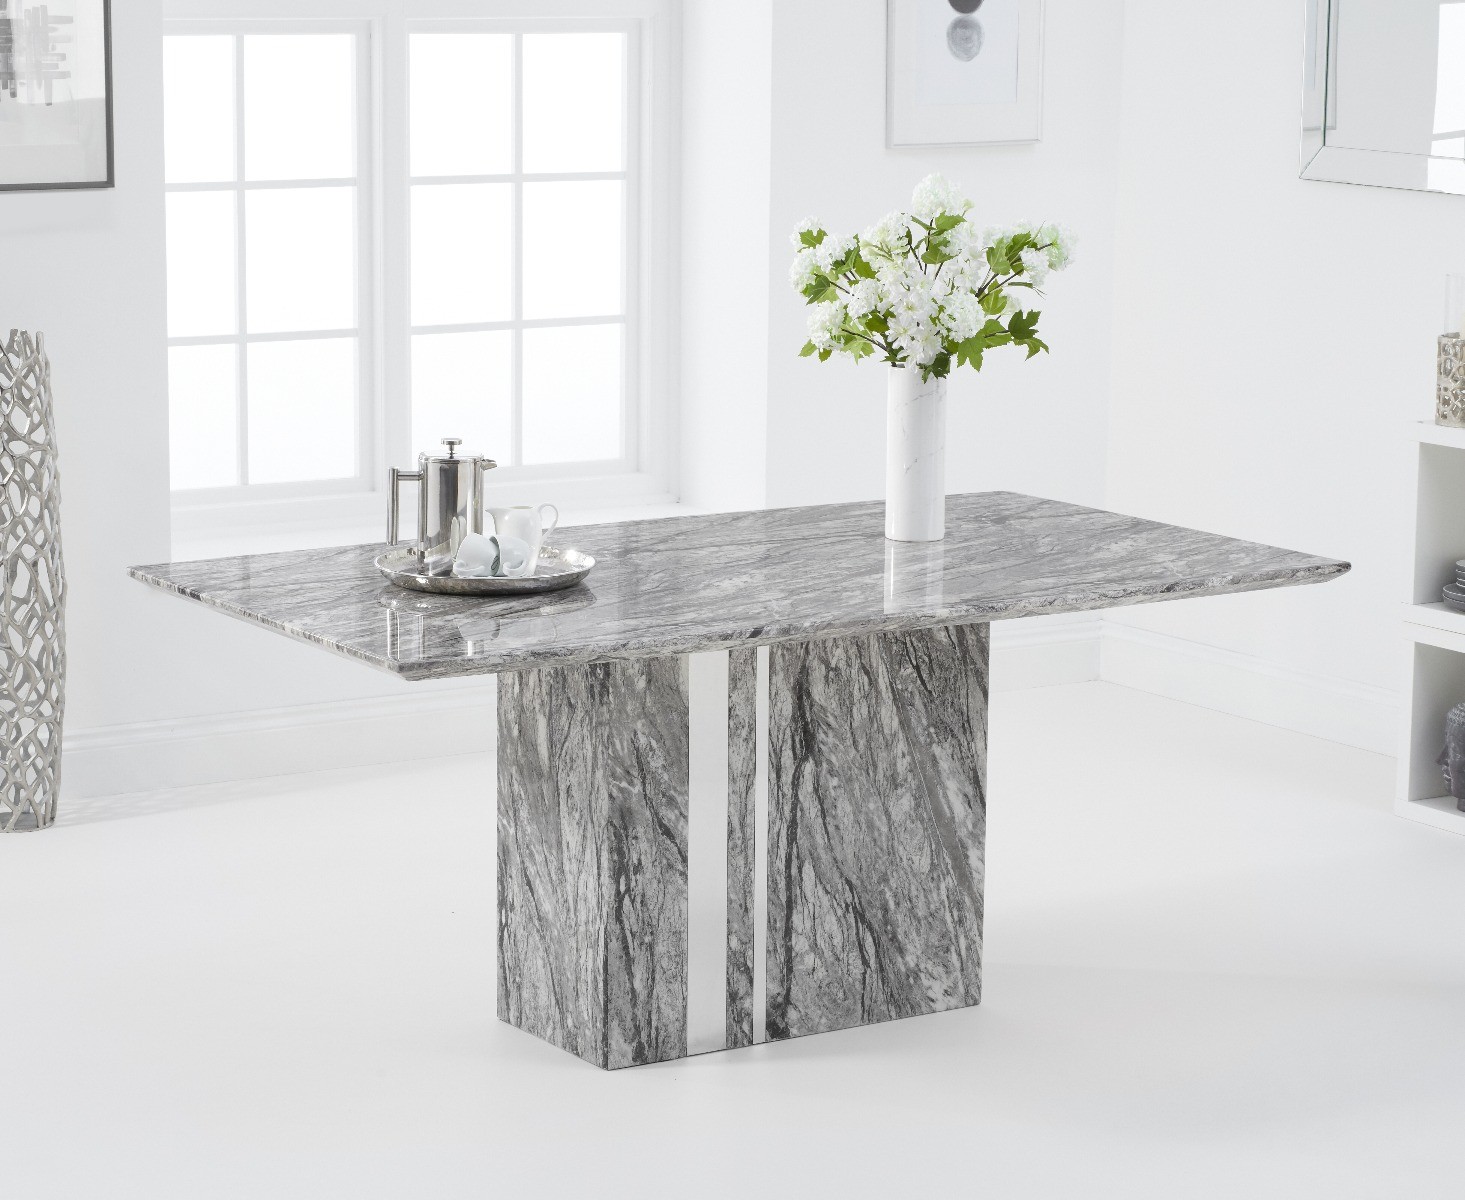 Photo 2 of Alicia 180cm grey marble dining table with 8 white aldo chairs